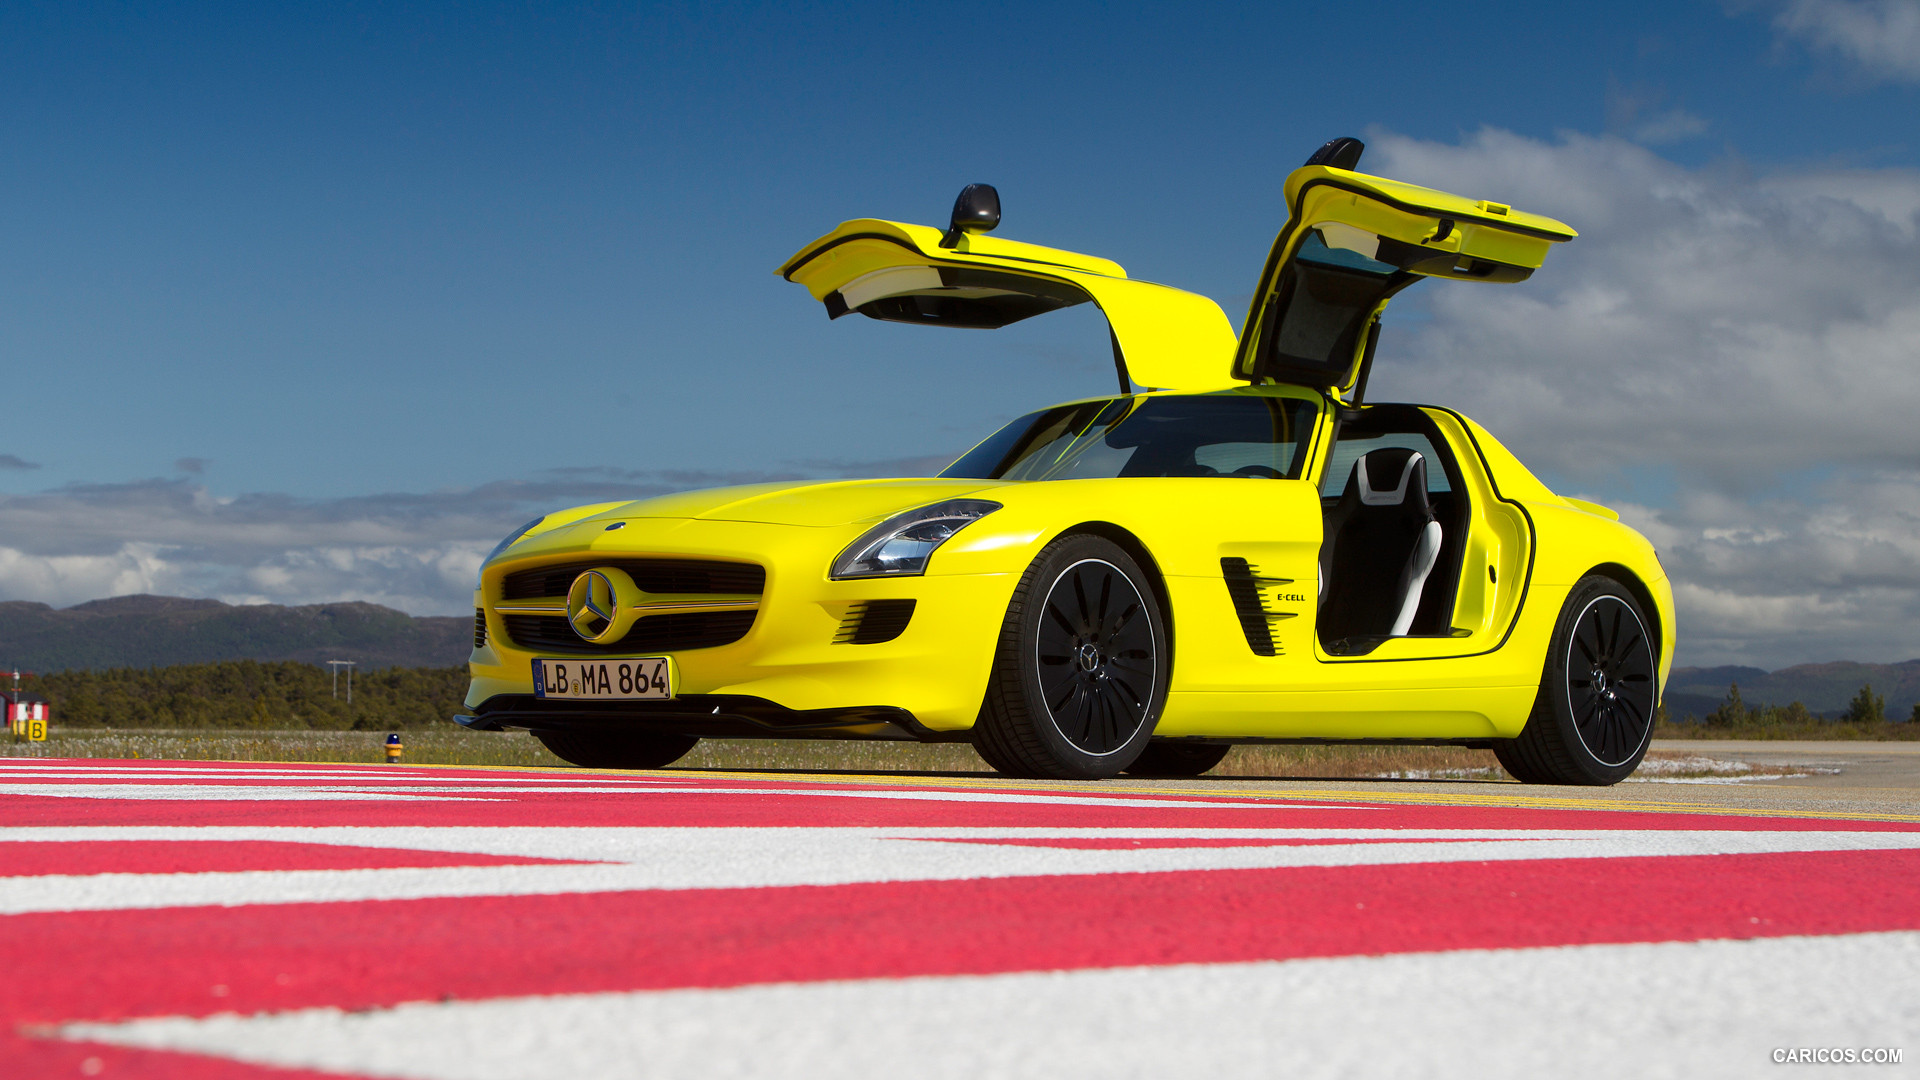 Mercedes-Benz SLS AMG E-CELL Concept  - Front, #20 of 60